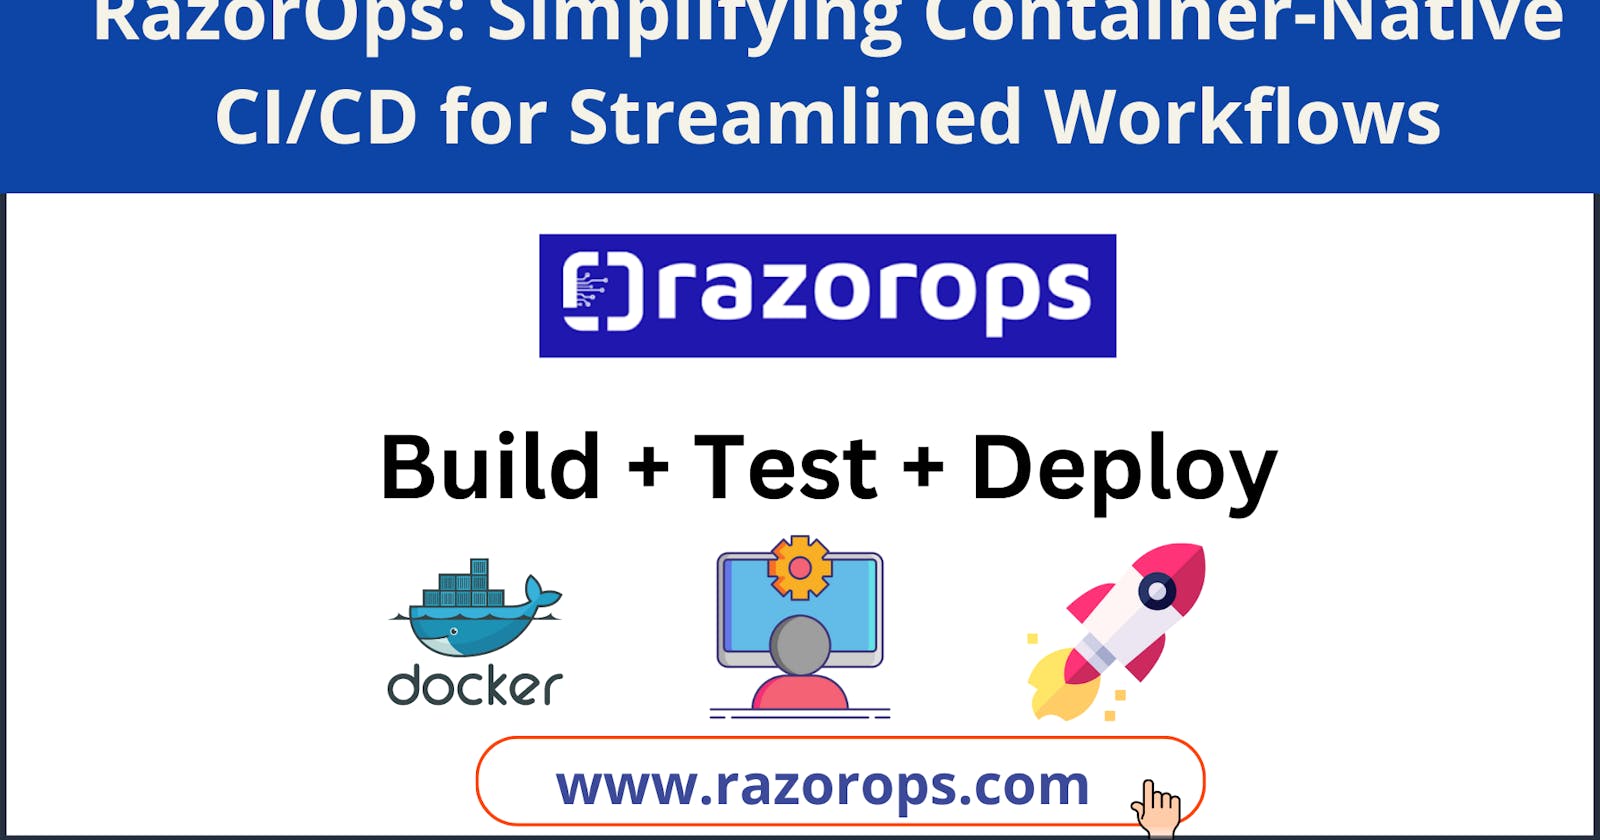 RazorOps: Simplifying Container-Native CI/CD for Streamlined Workflows